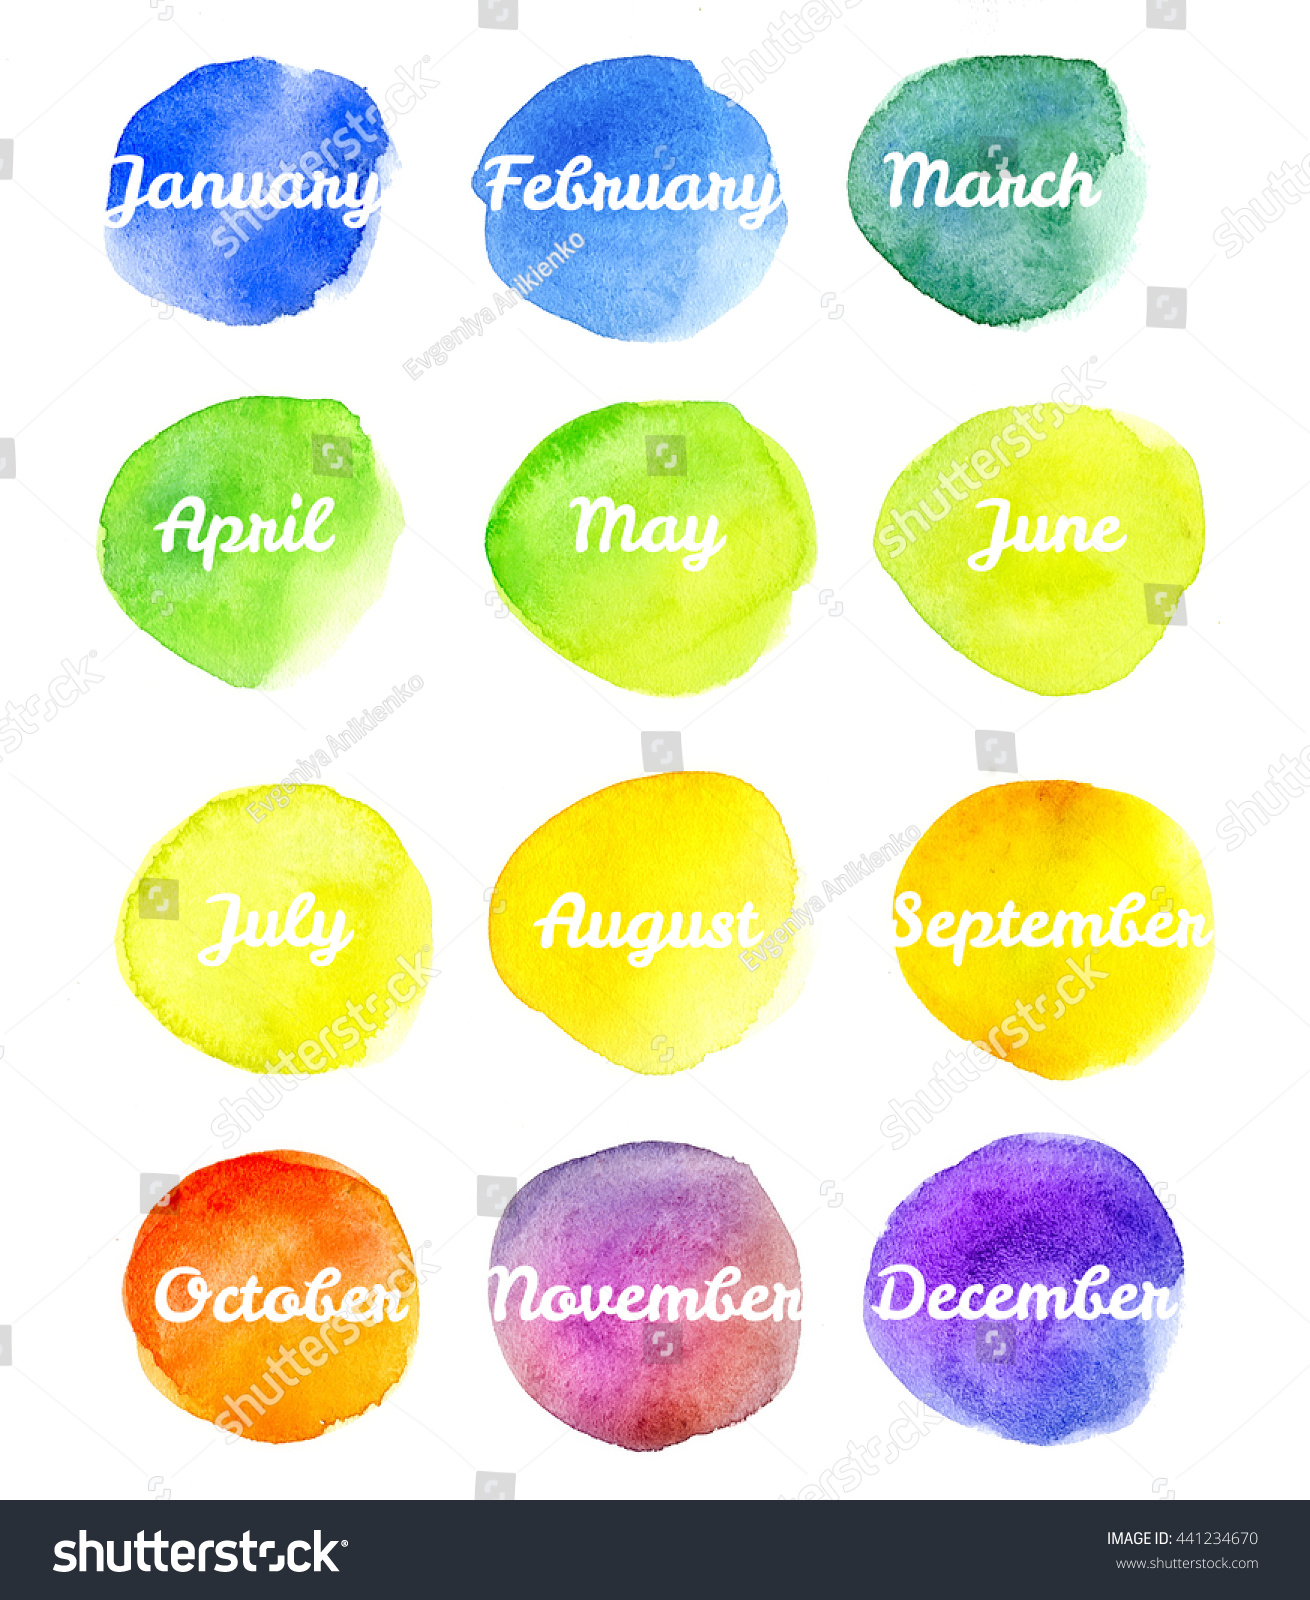 All Months Year Calendar Watercolor Spots Stock Illustration